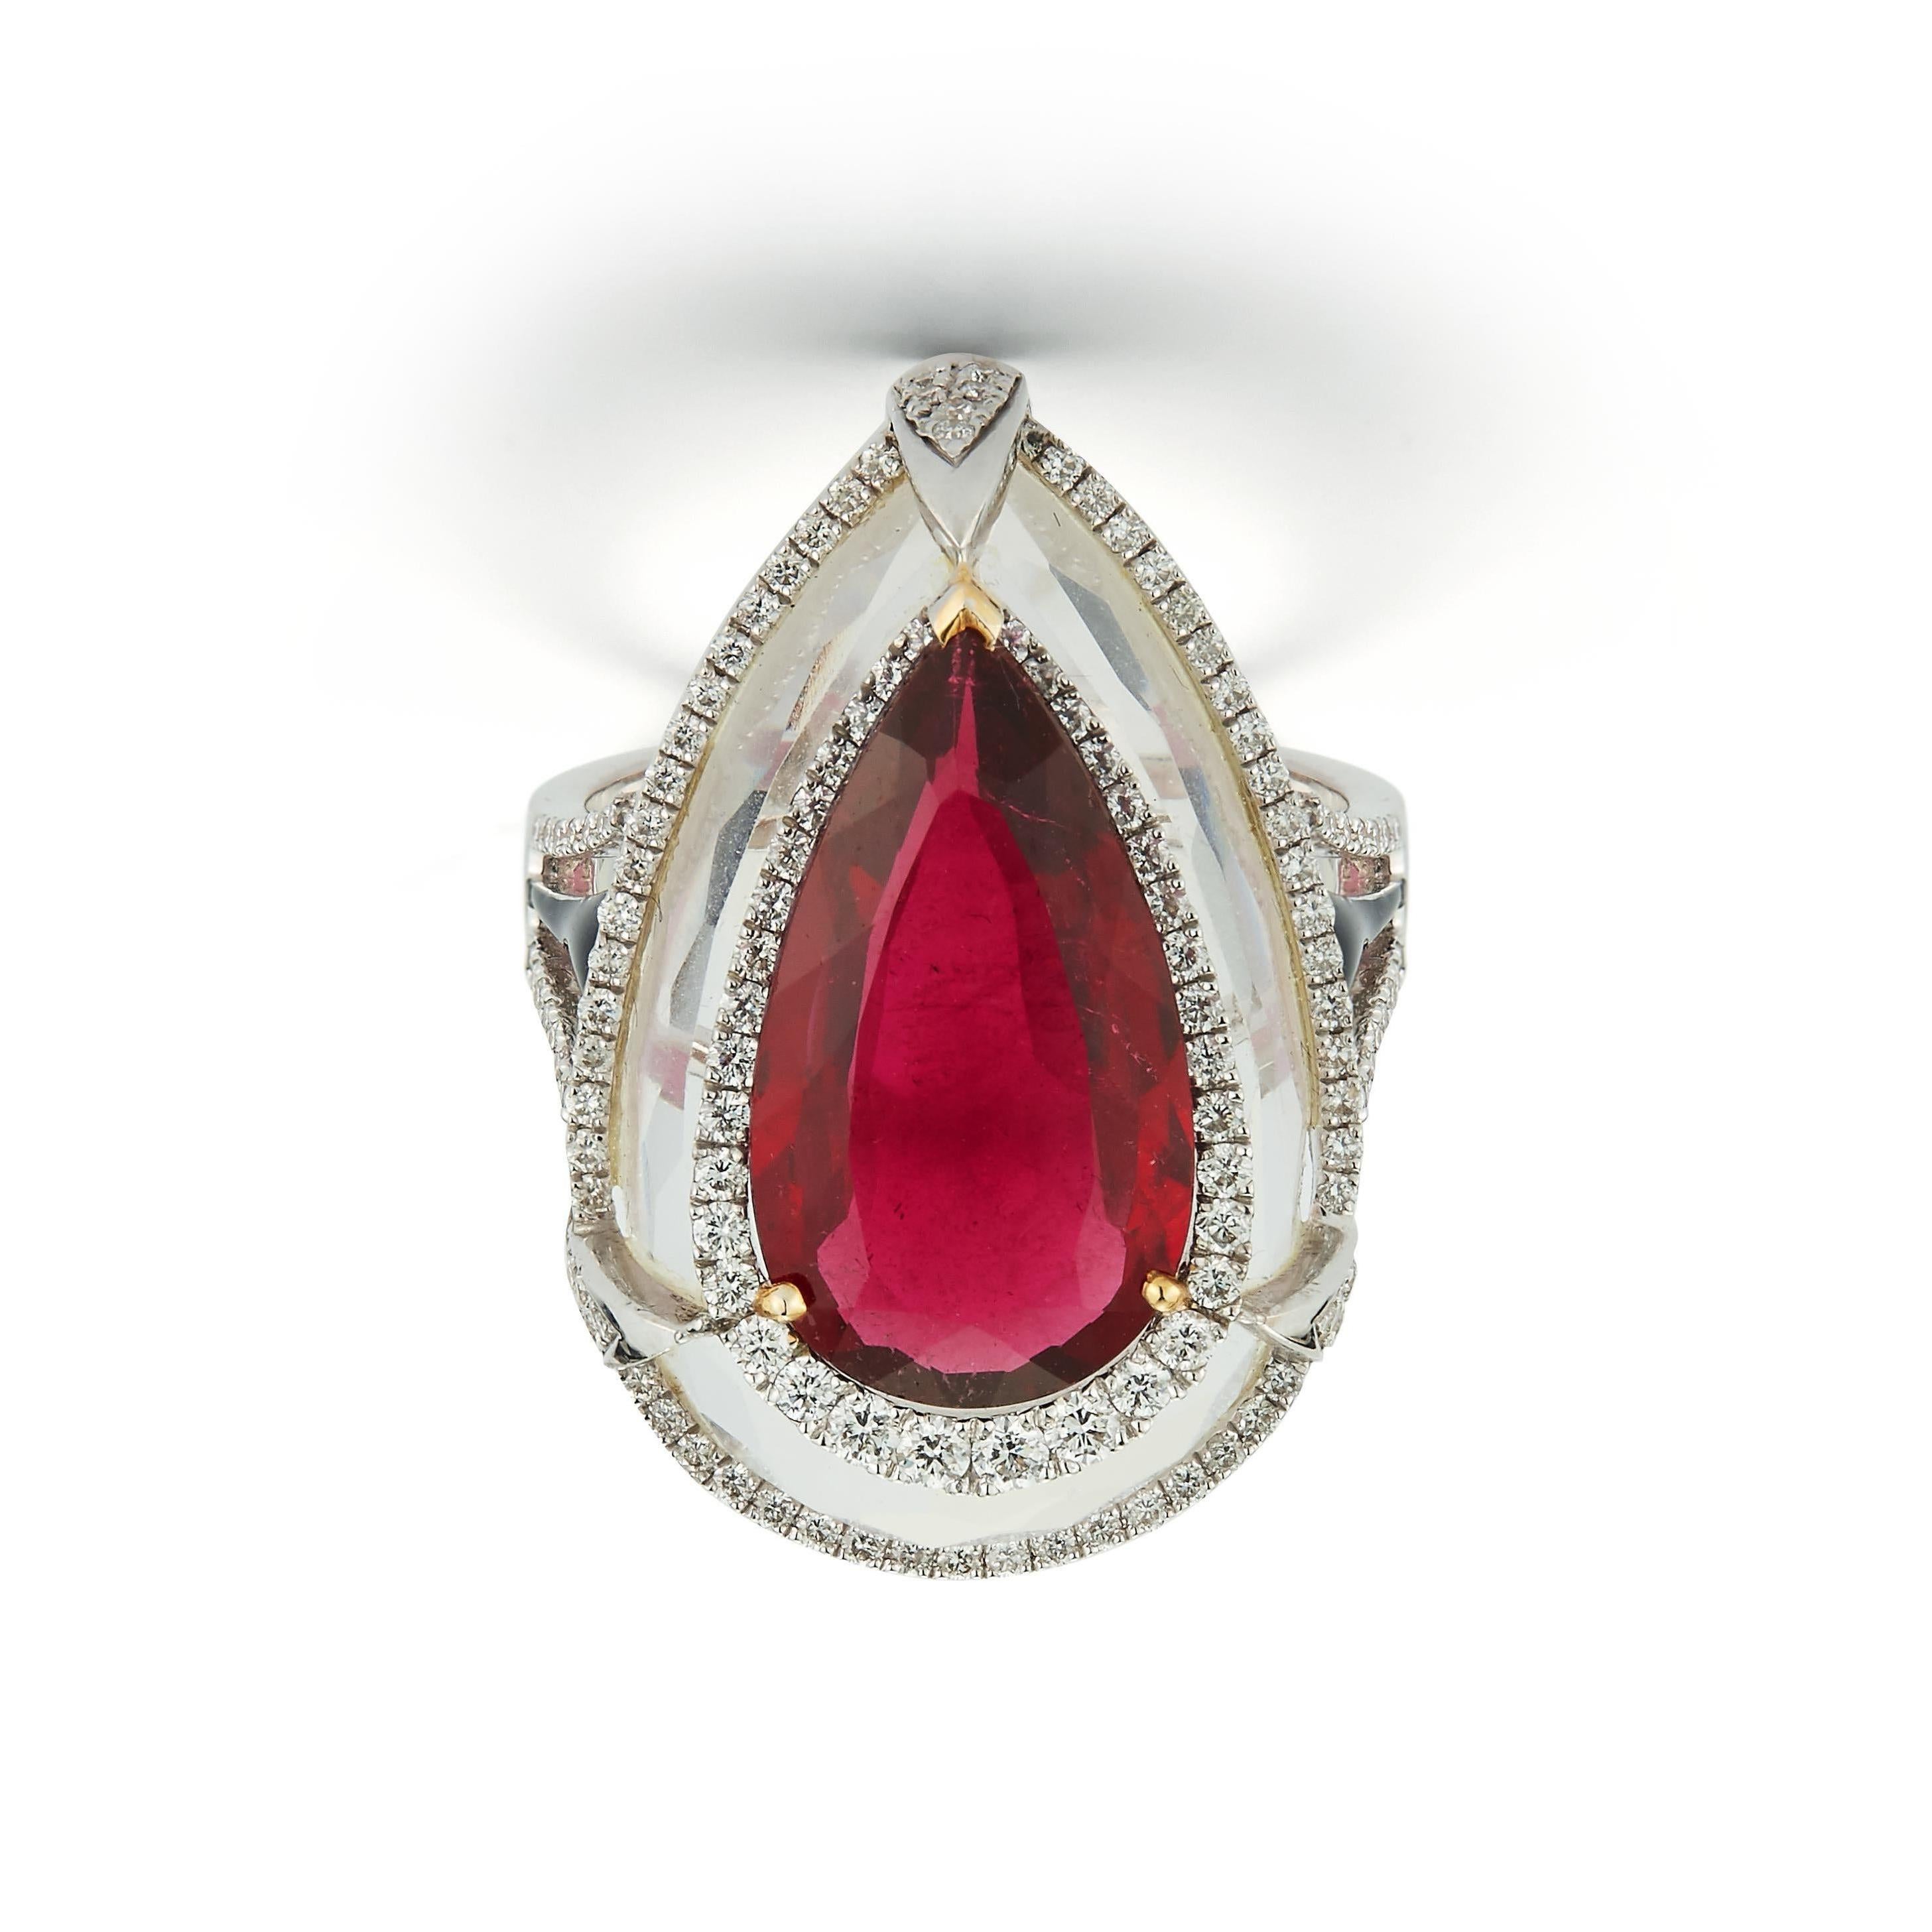 Pear Shape Tourmaline Set in Rock Crystal Ring  
Tourmaline Weight: Approximately 7.08 cts 
Diamond Weight:  Approximately .83 Cts 
Ring Size: 6.5
Resizable free of charge 
18K White Gold 